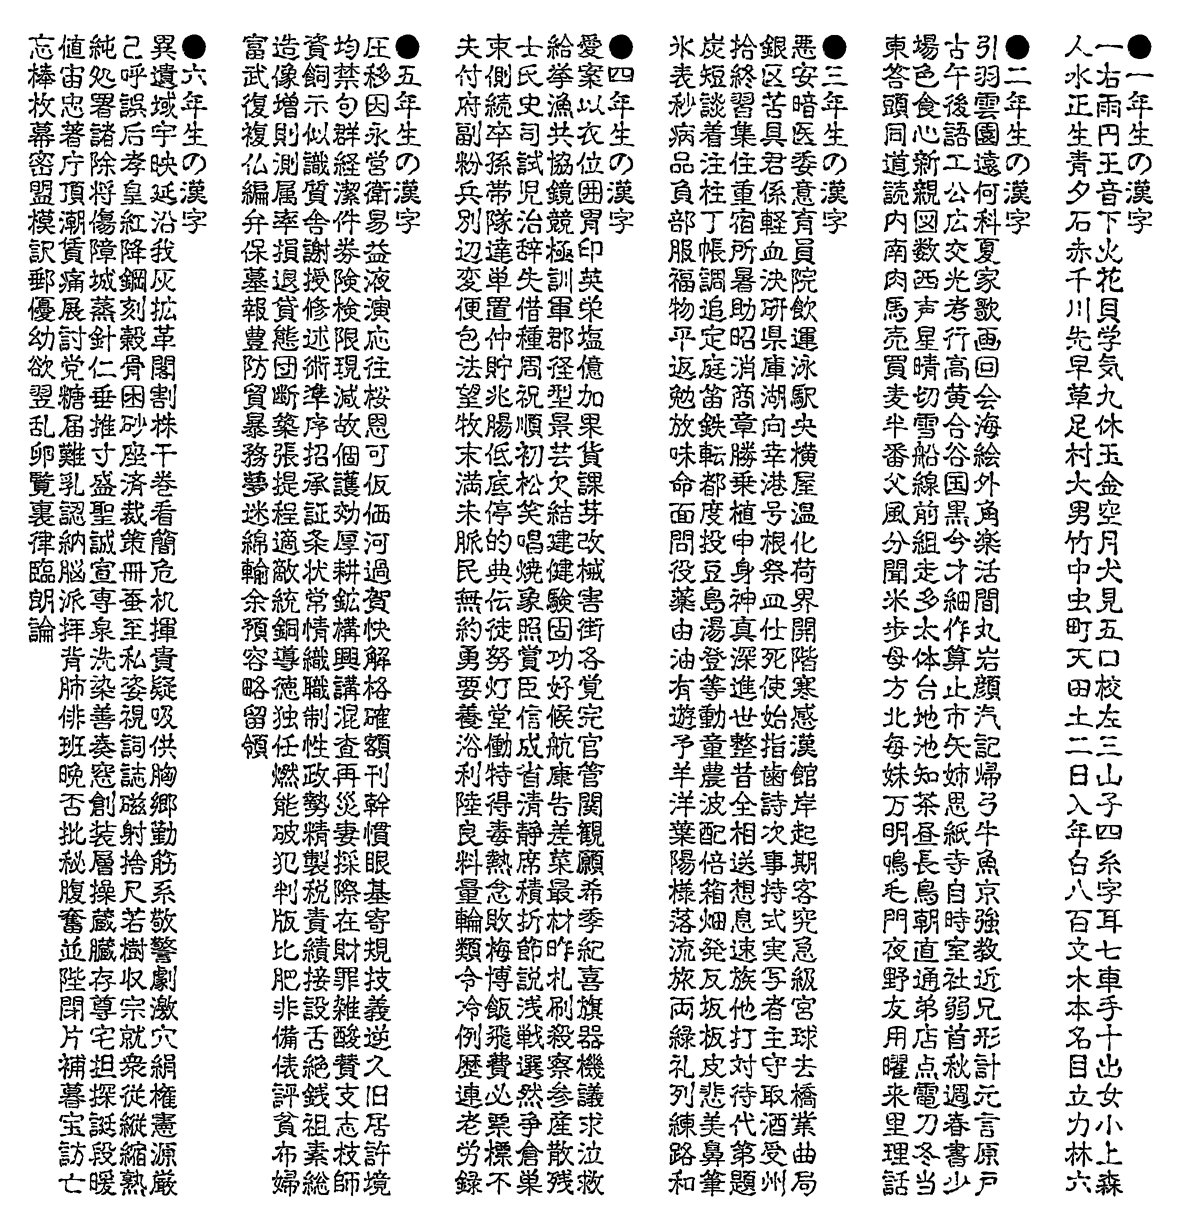 lægemidlet mærke Windswept Tokyonobo on X: "This is the list of 1026 kanji (Chinese character) taught  in Japanese primary schools. The total number of kanji learned by junior  high school graduation (compulsory education period) is